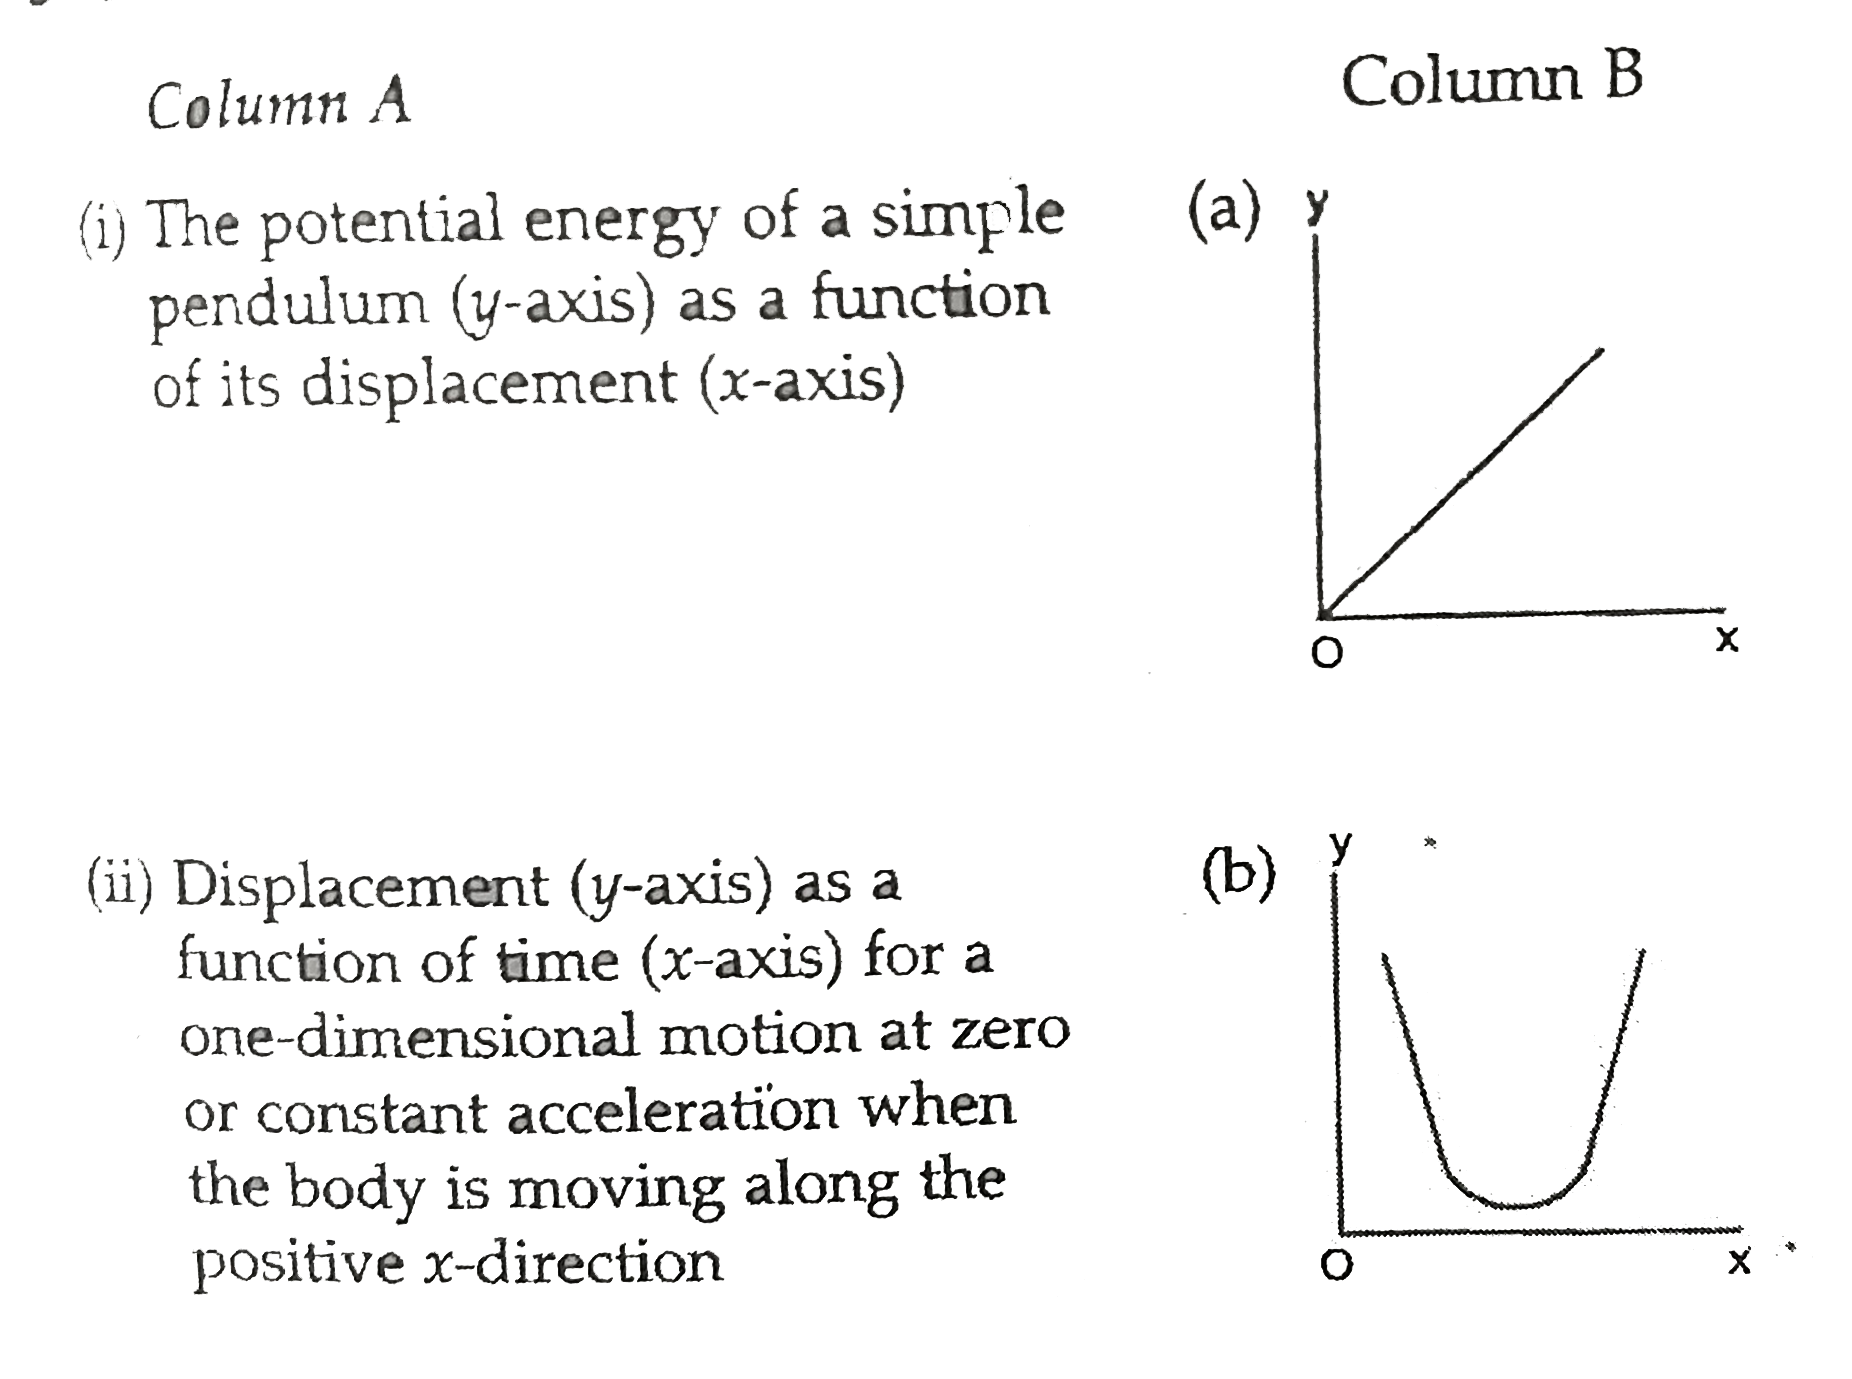 Column A gives a list of possible set of parameters measured in some experiments . The variations of the parameters in the form of graphs are shown in column B.